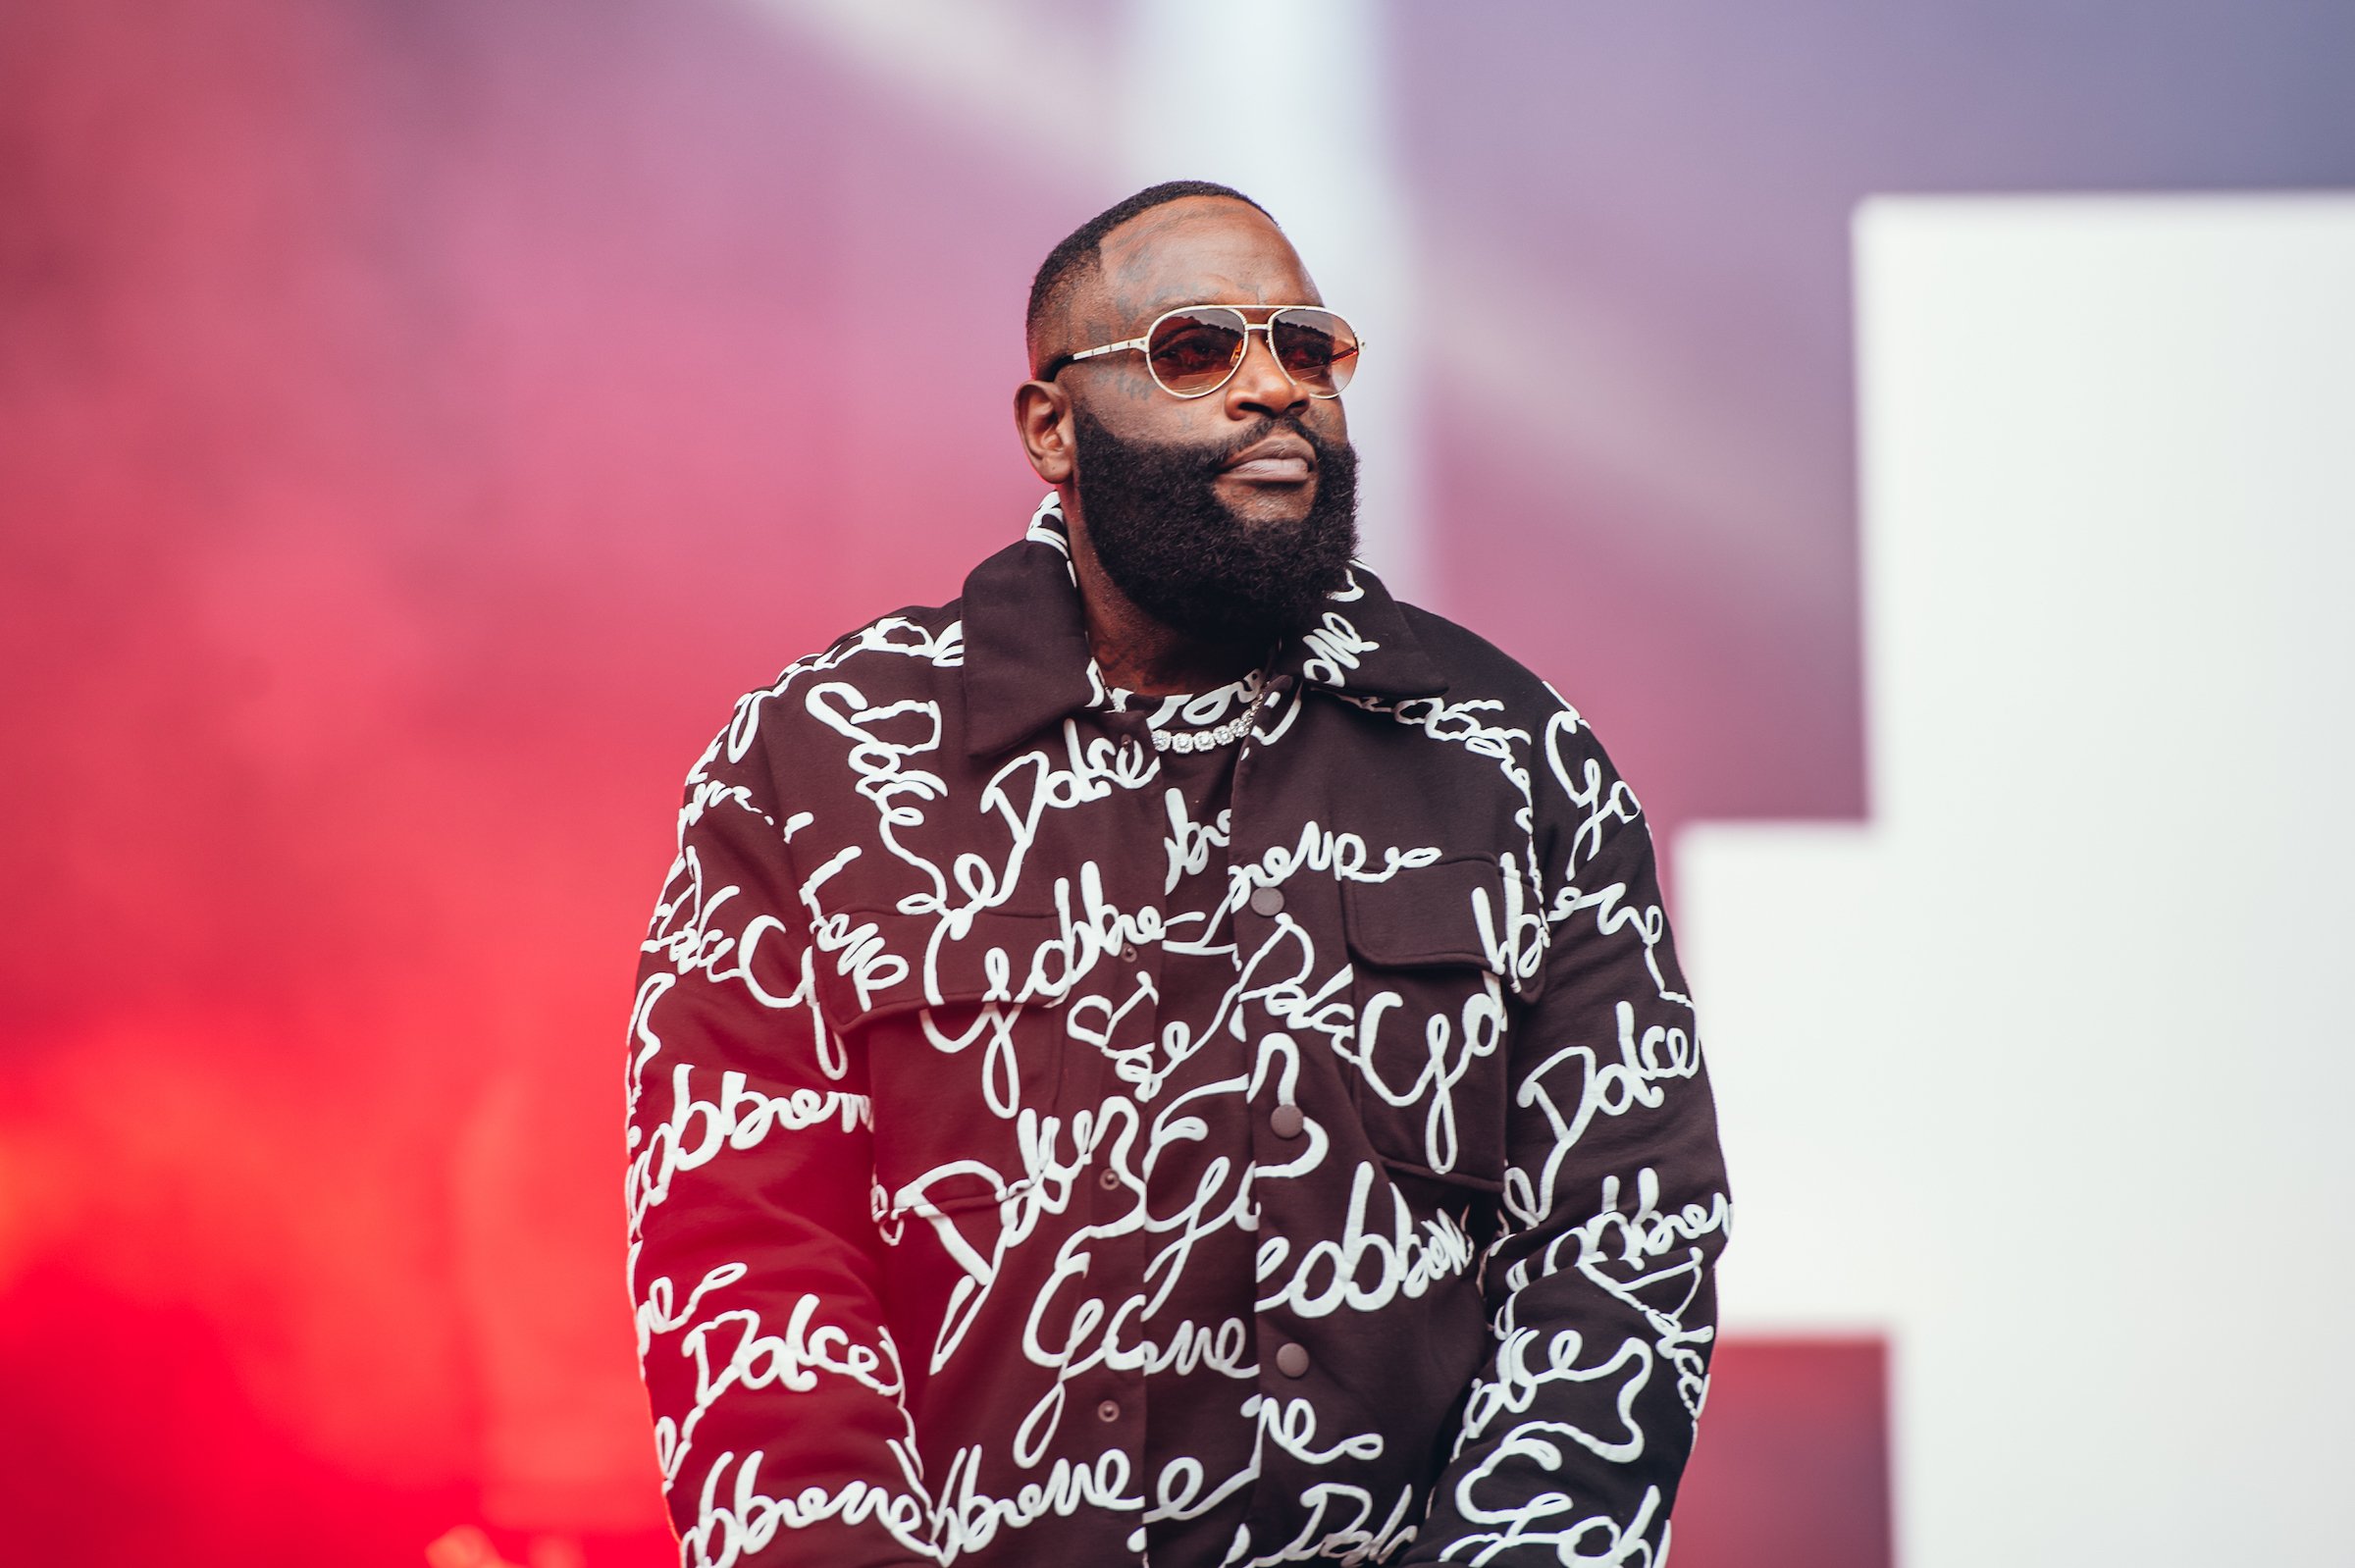 Rick Ross wearing a black and white jacket